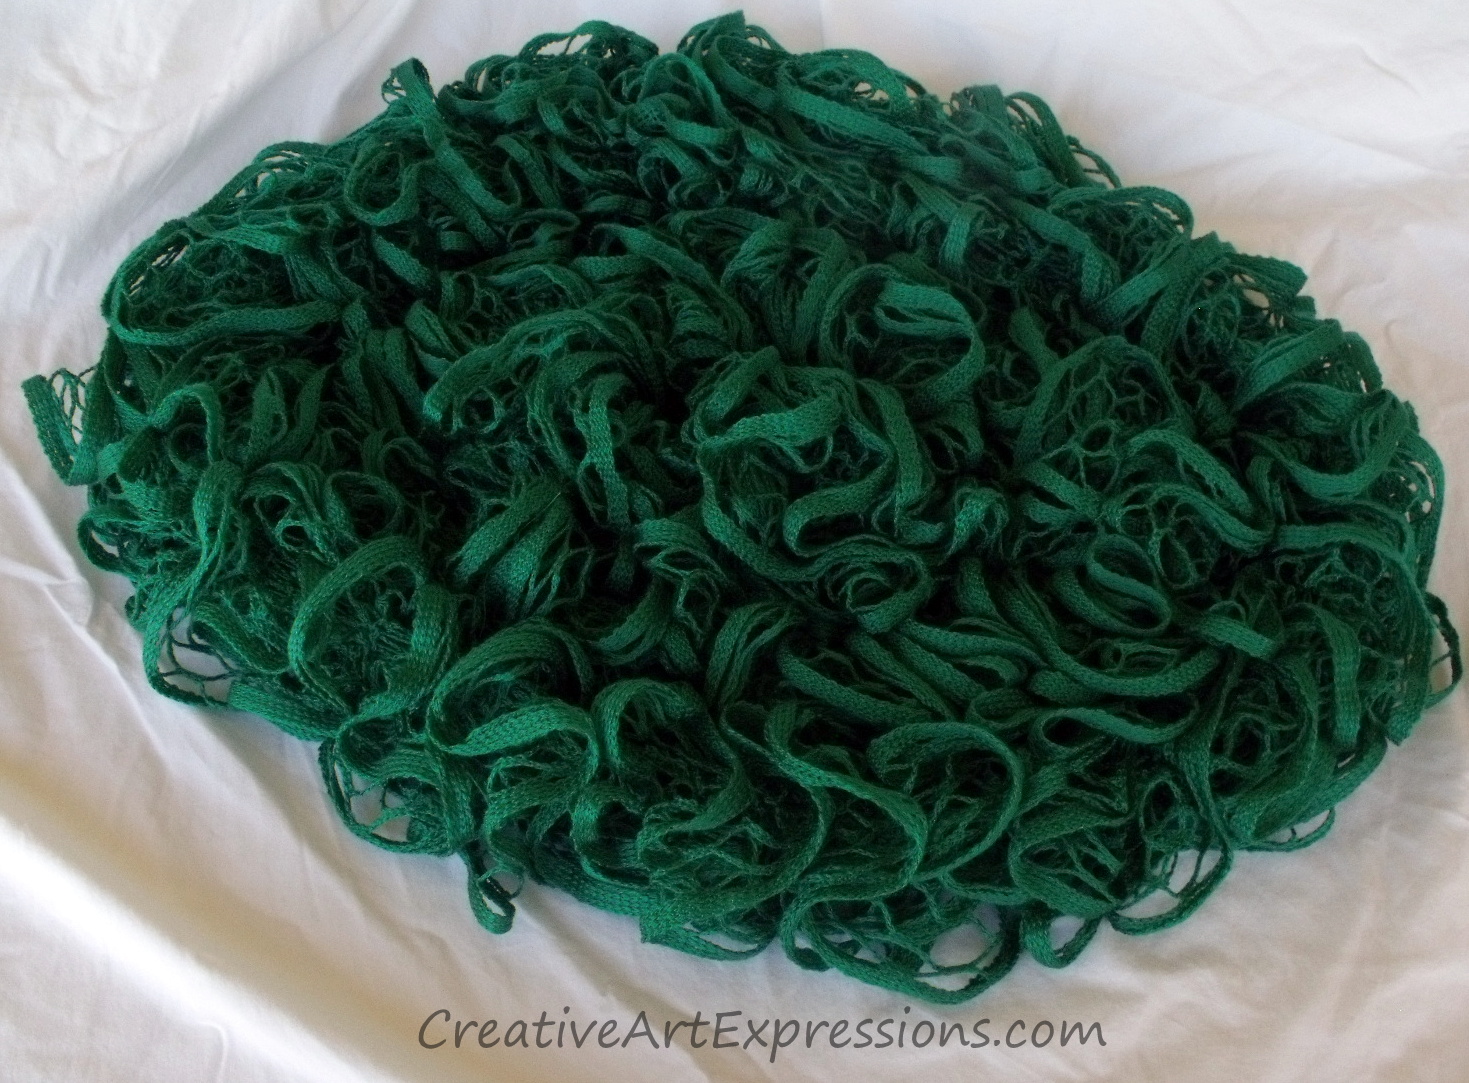 Creative Art Expressions Hand Knitted Emerald Green Baby Photo Prop Blanket